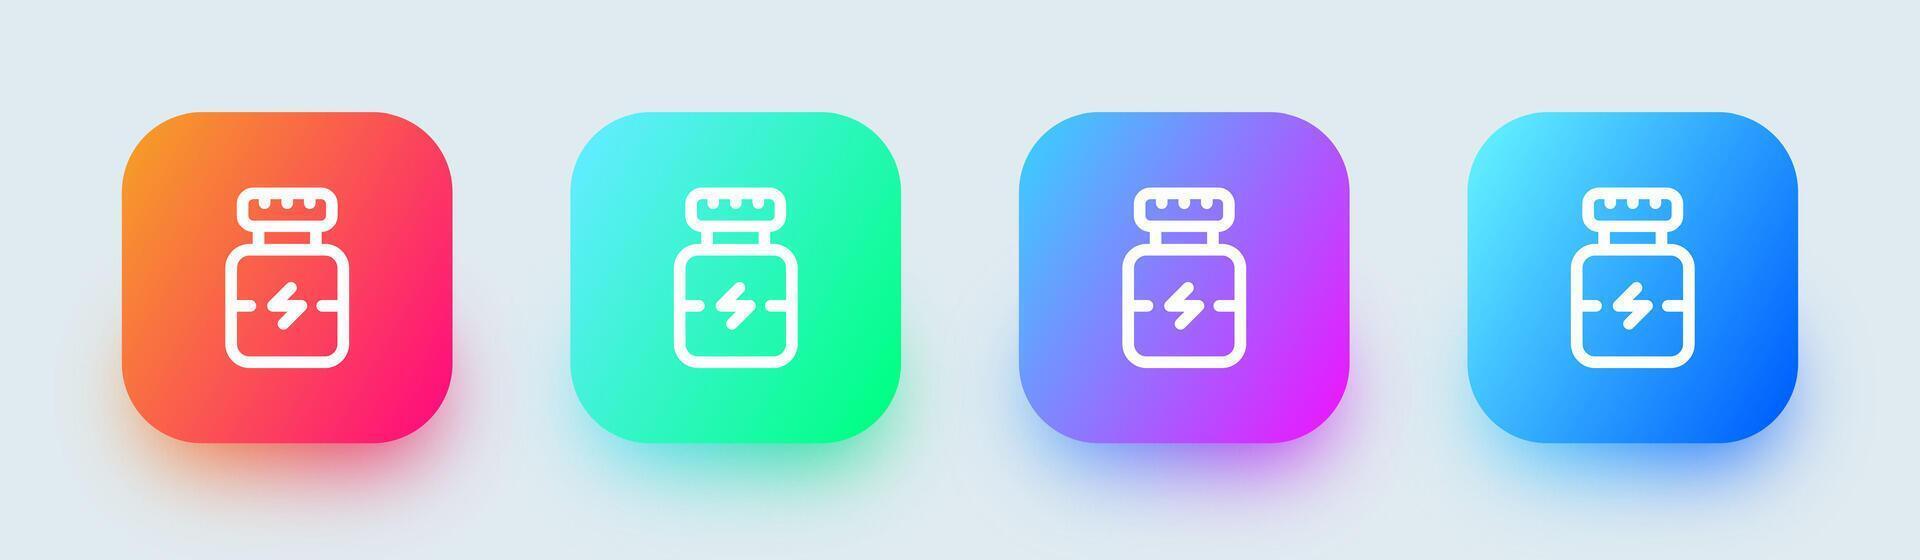 Supplement line icon in square gradient colors. Vitamin signs vector illustration.